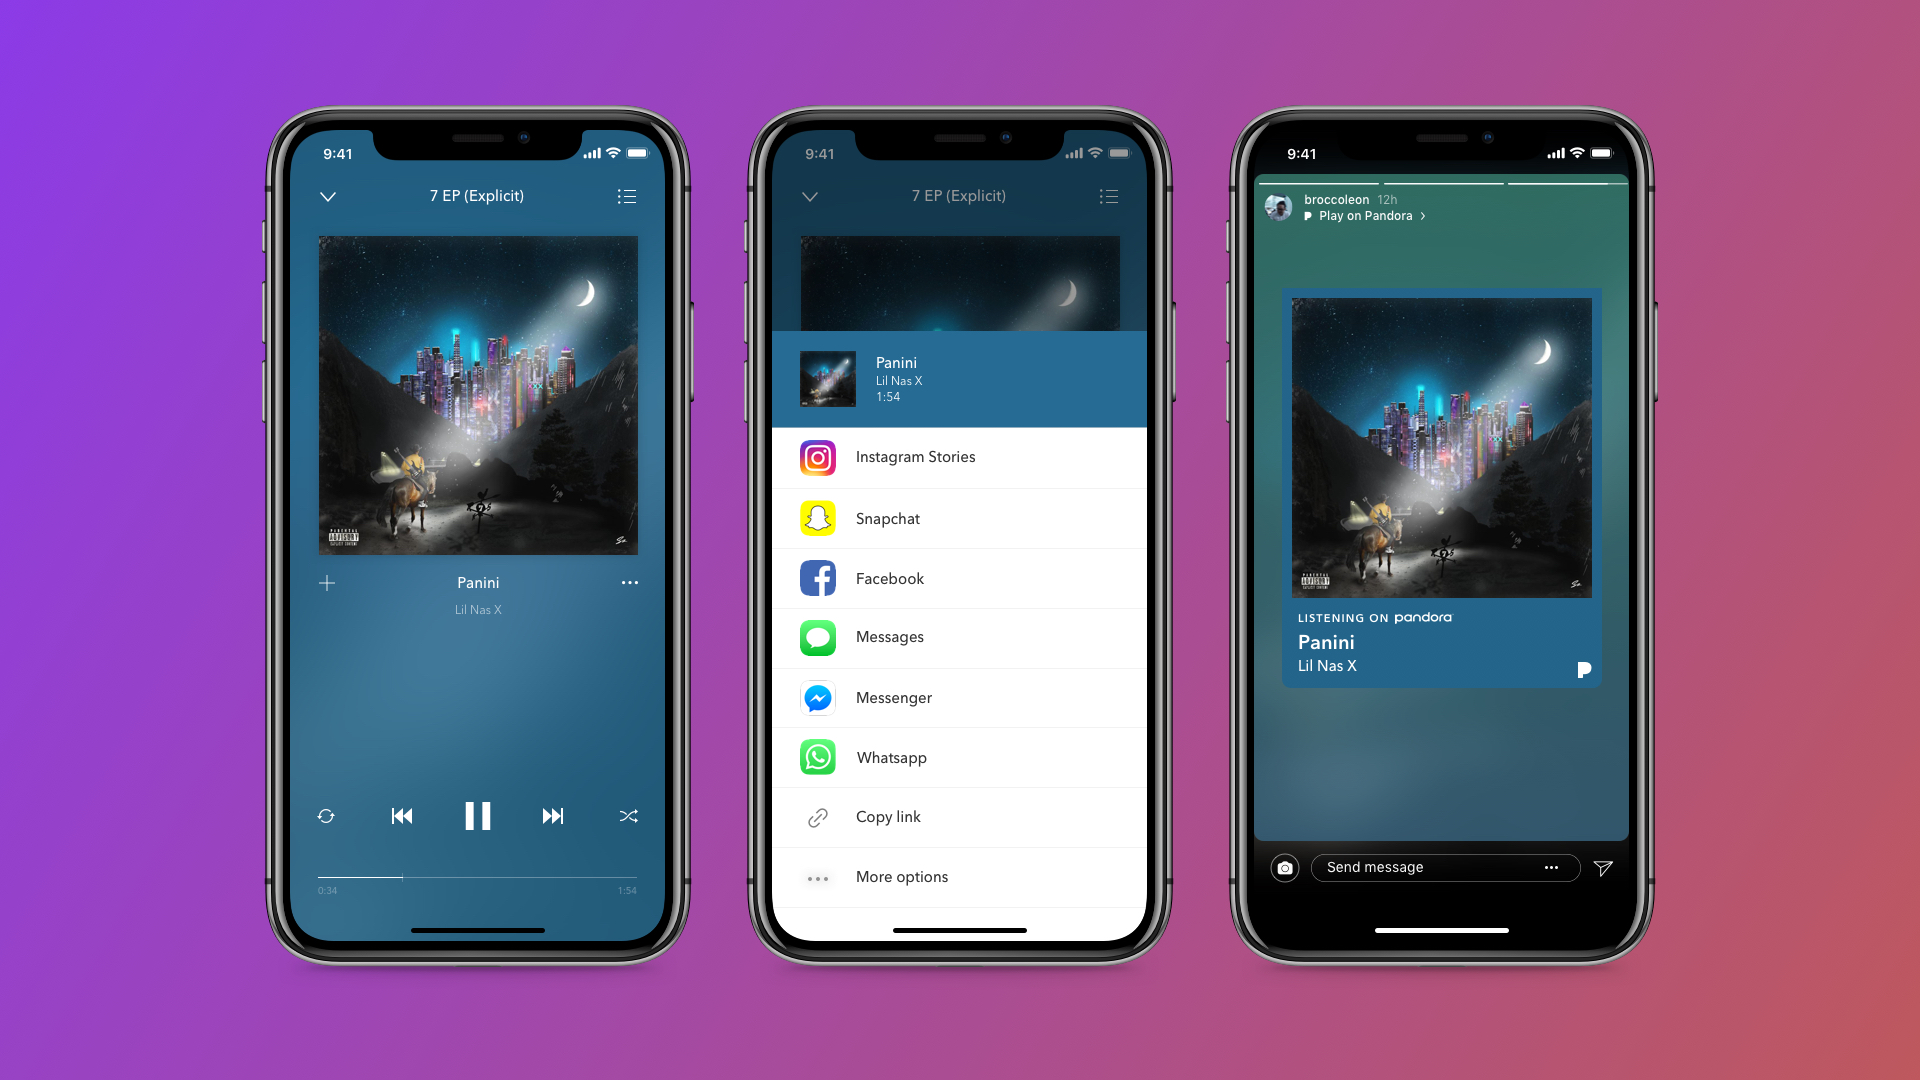 Take your favourite music and podcasts on Pandora to Instagram Stories